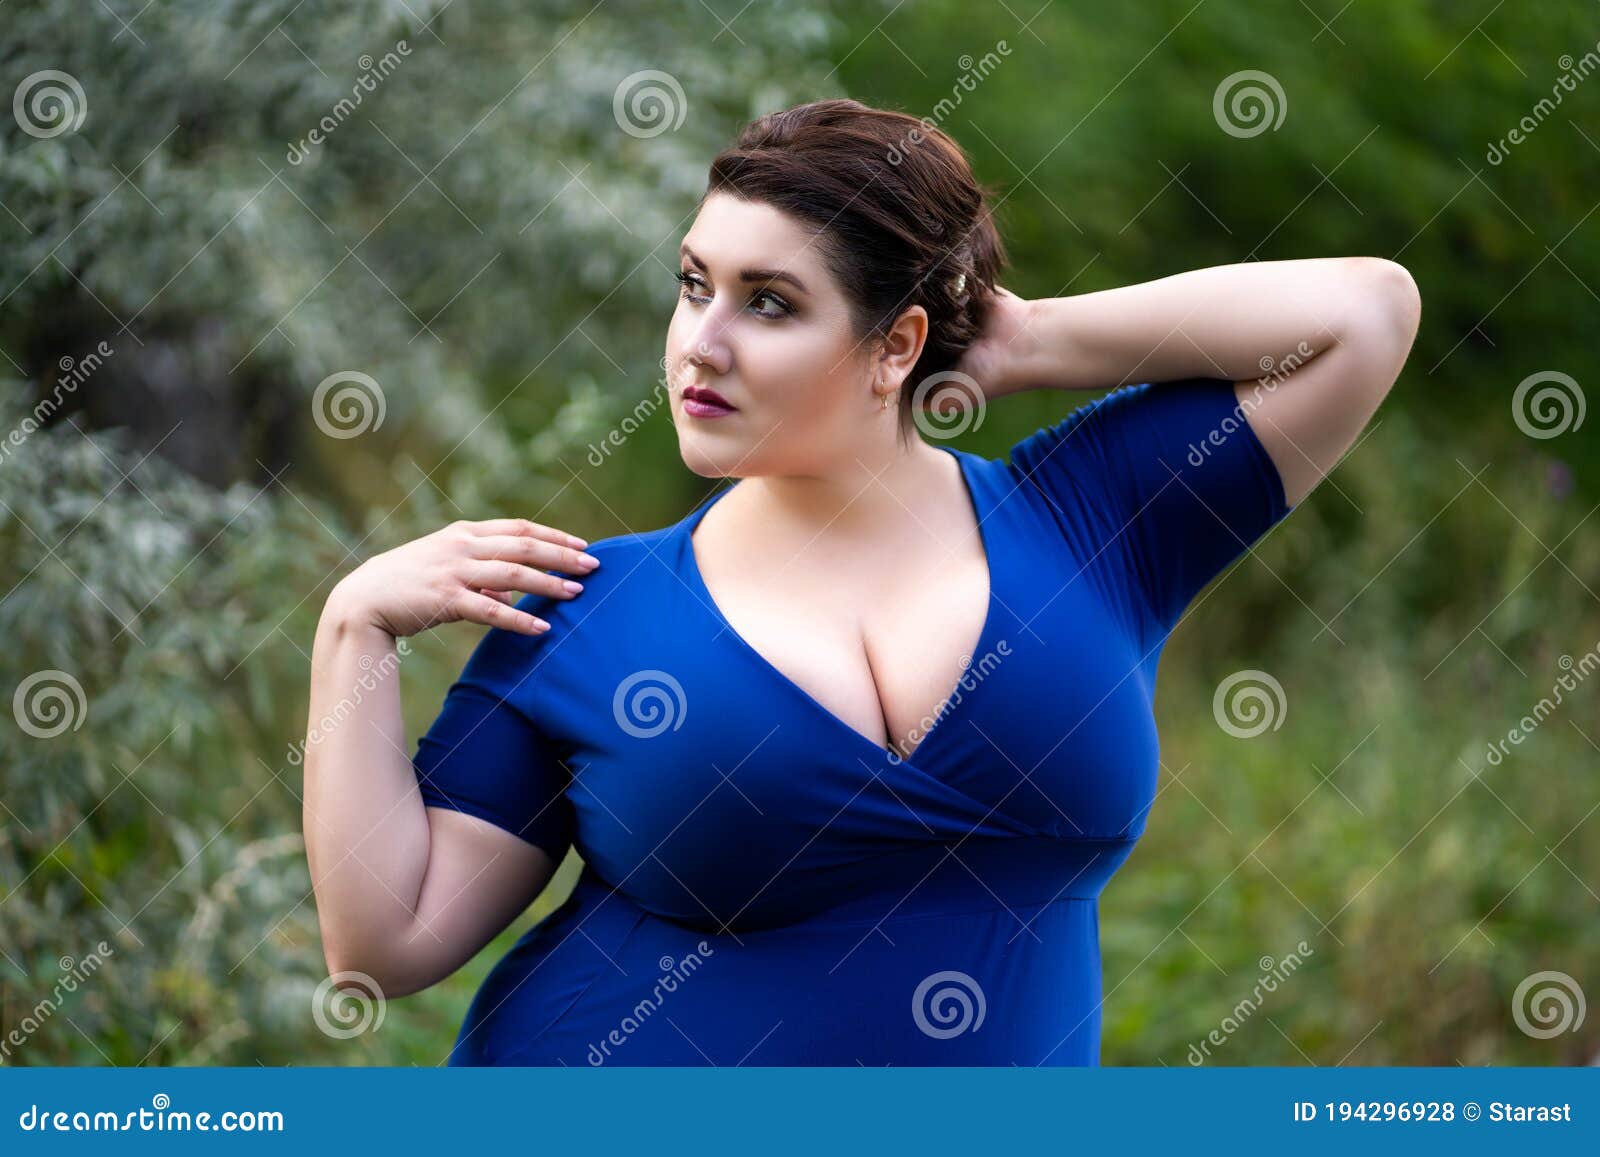 Fat Girl With Big Boobs